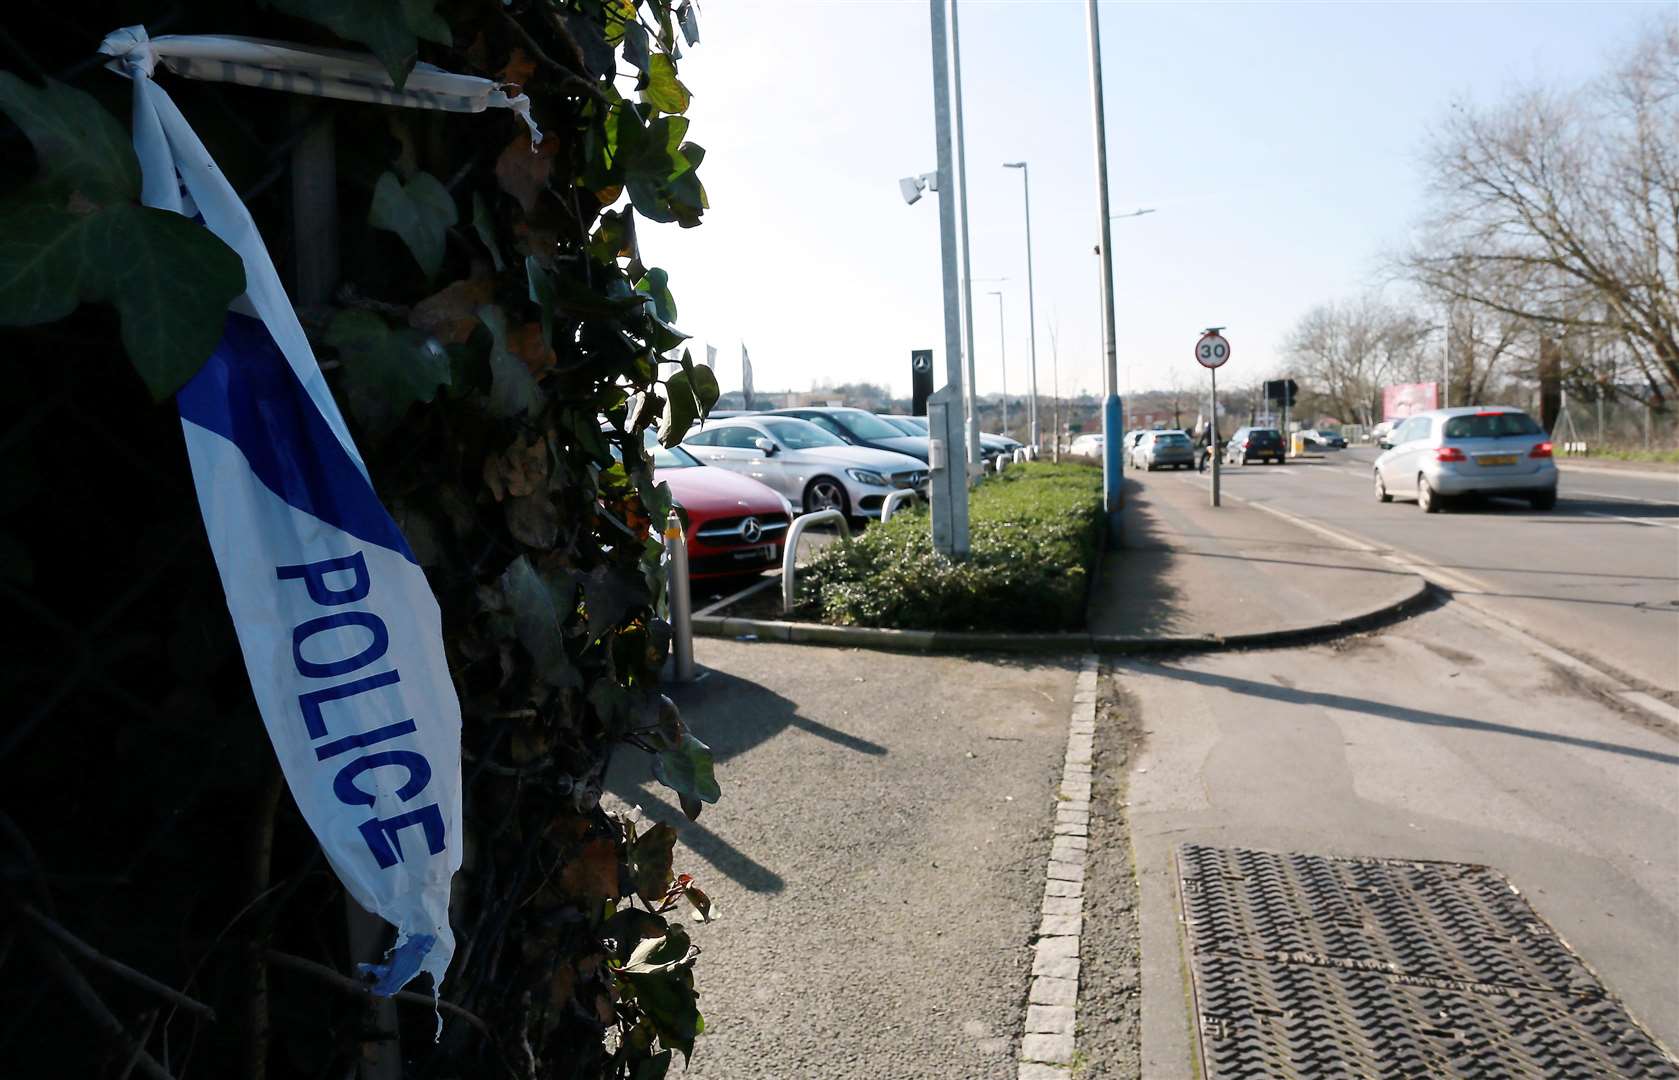 Police searched an area next to Mercedes-Benz Tonbridge after a stabbing on Saturday night. Picture: Phil Lee